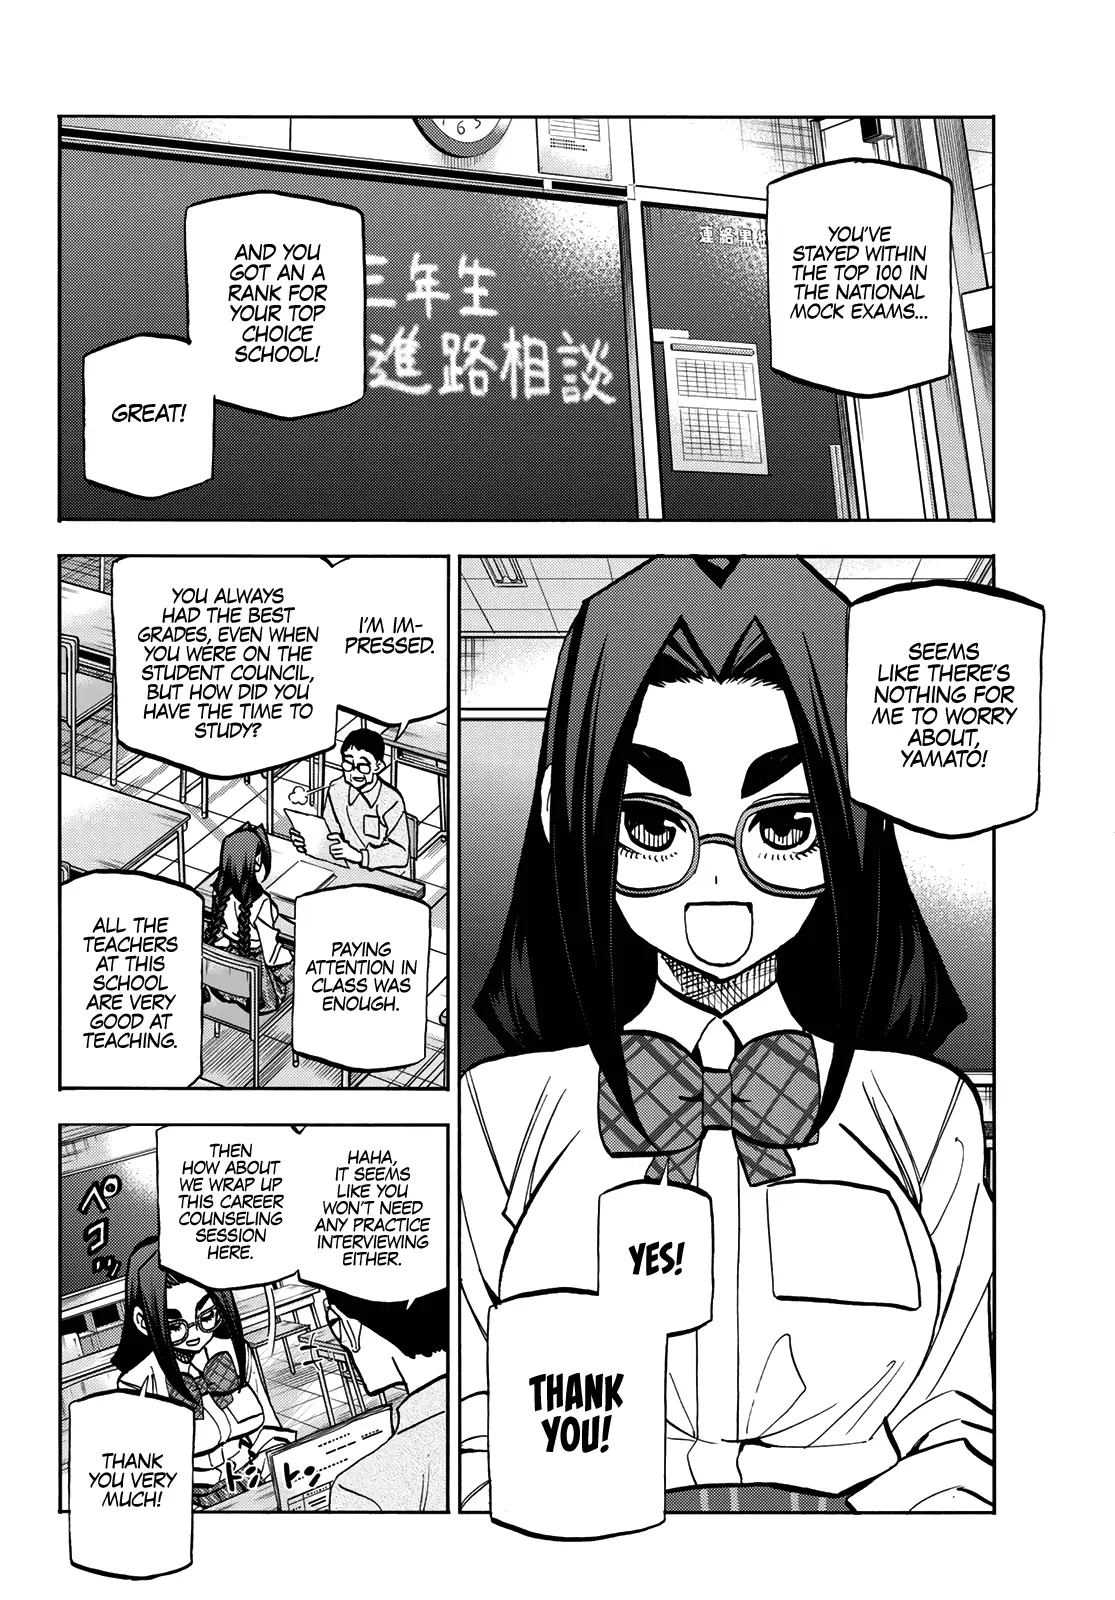 The Story Between A Dumb Prefect And A High School Girl With An Inappropriate Skirt Length - 42 page 2-f0098141